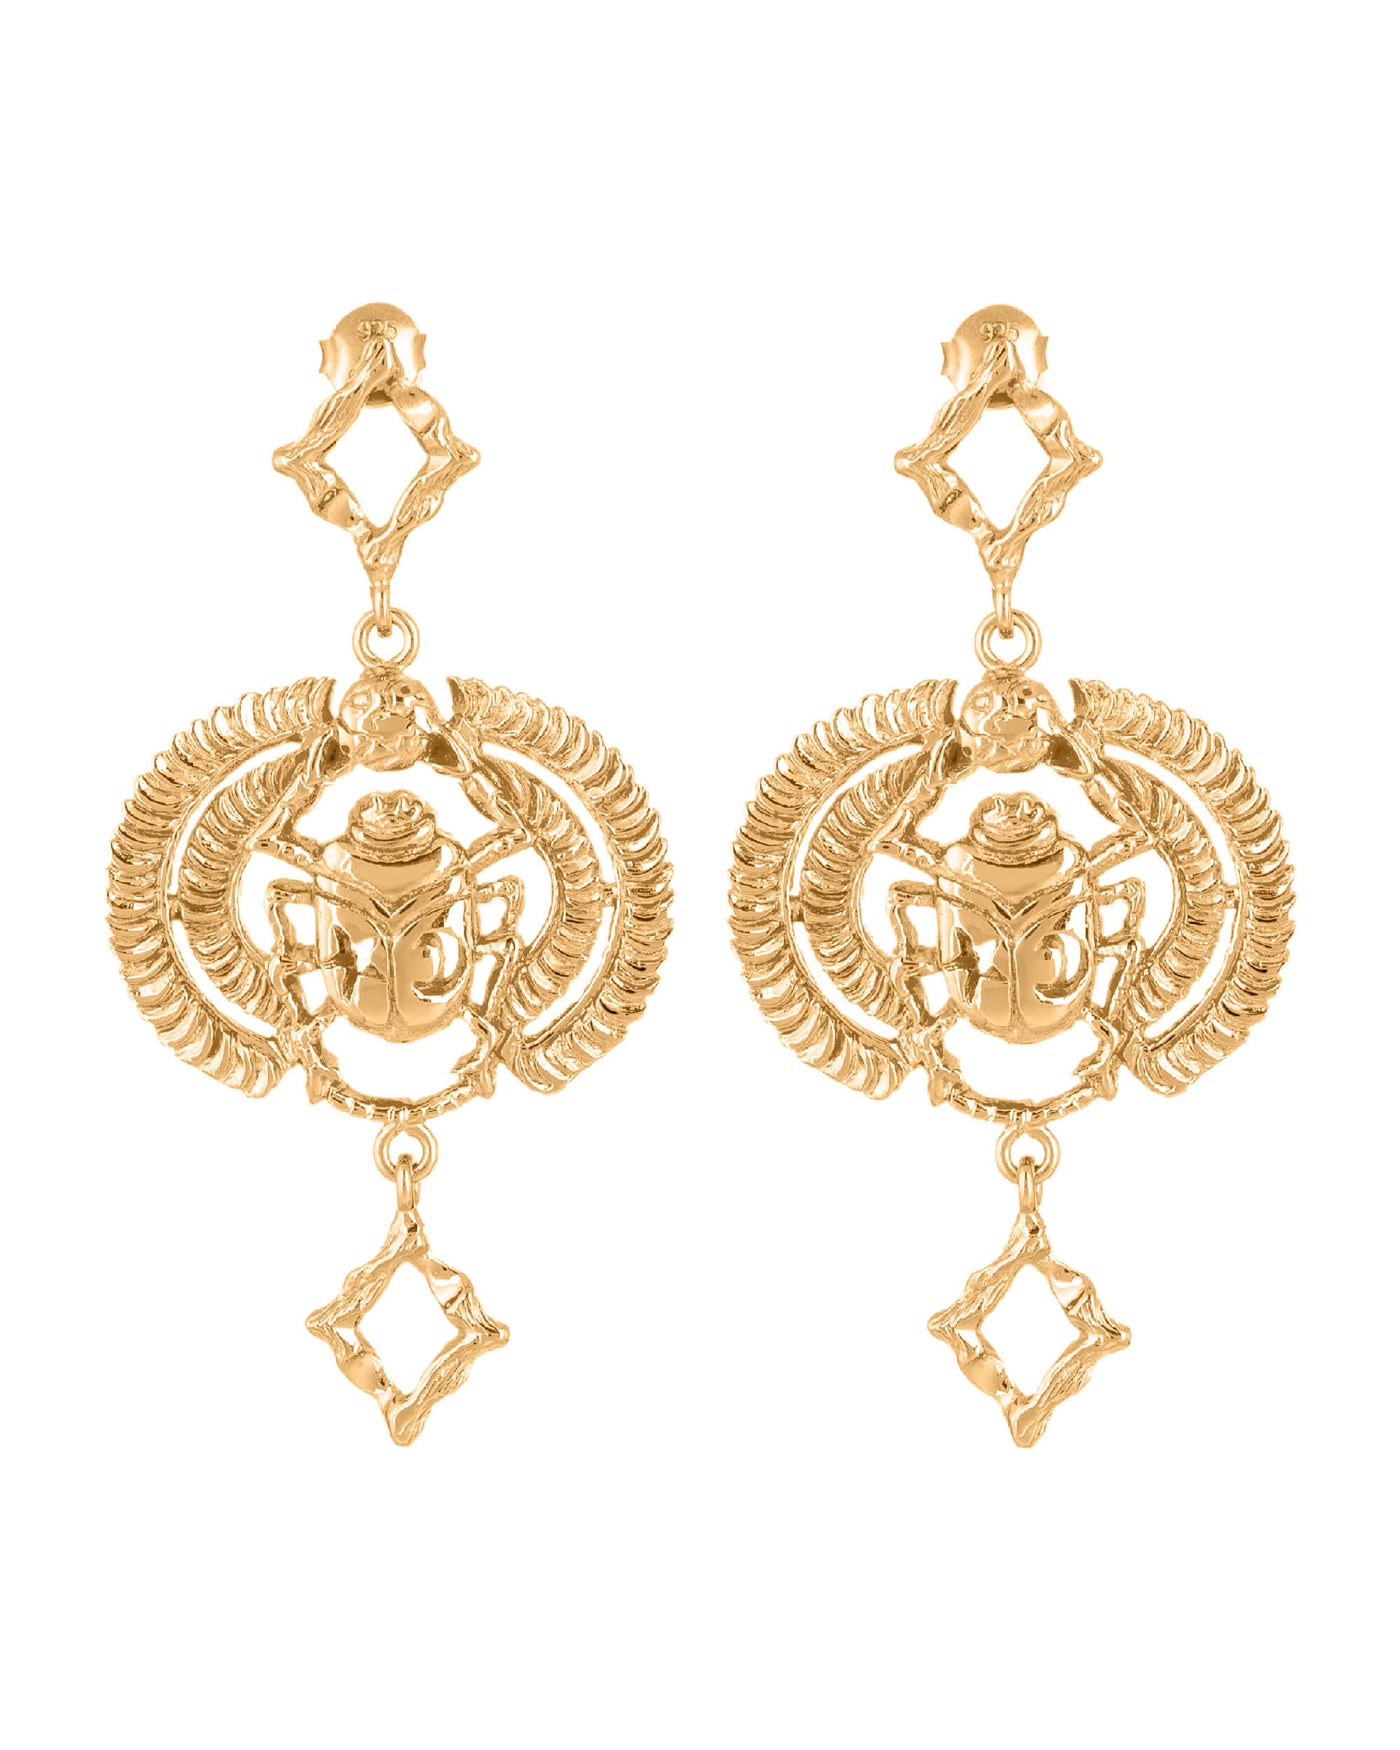 Scarab earrings. Silver, gold-plated